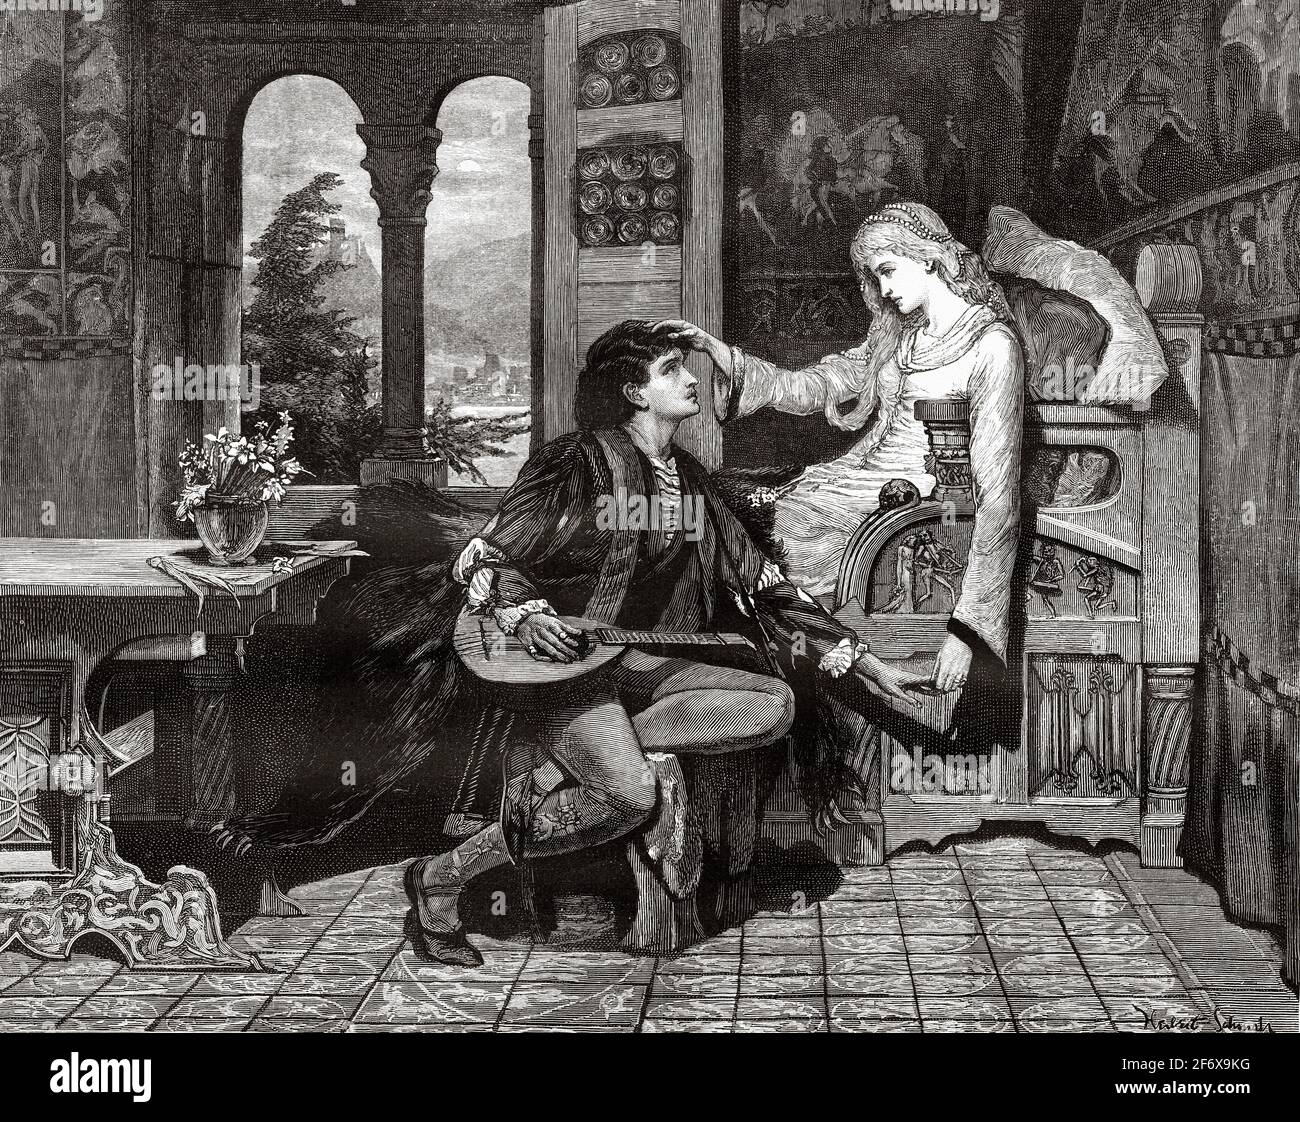 I will always love you. Young woman and troubadour by Herbert Schmalz (1856-1935) English Victorian painter who cultivated Orientalist themes with a certain Pre-Raphaelite aesthetic. Old 19th century engraved illustration from El Mundo Ilustrado 1879 Stock Photo